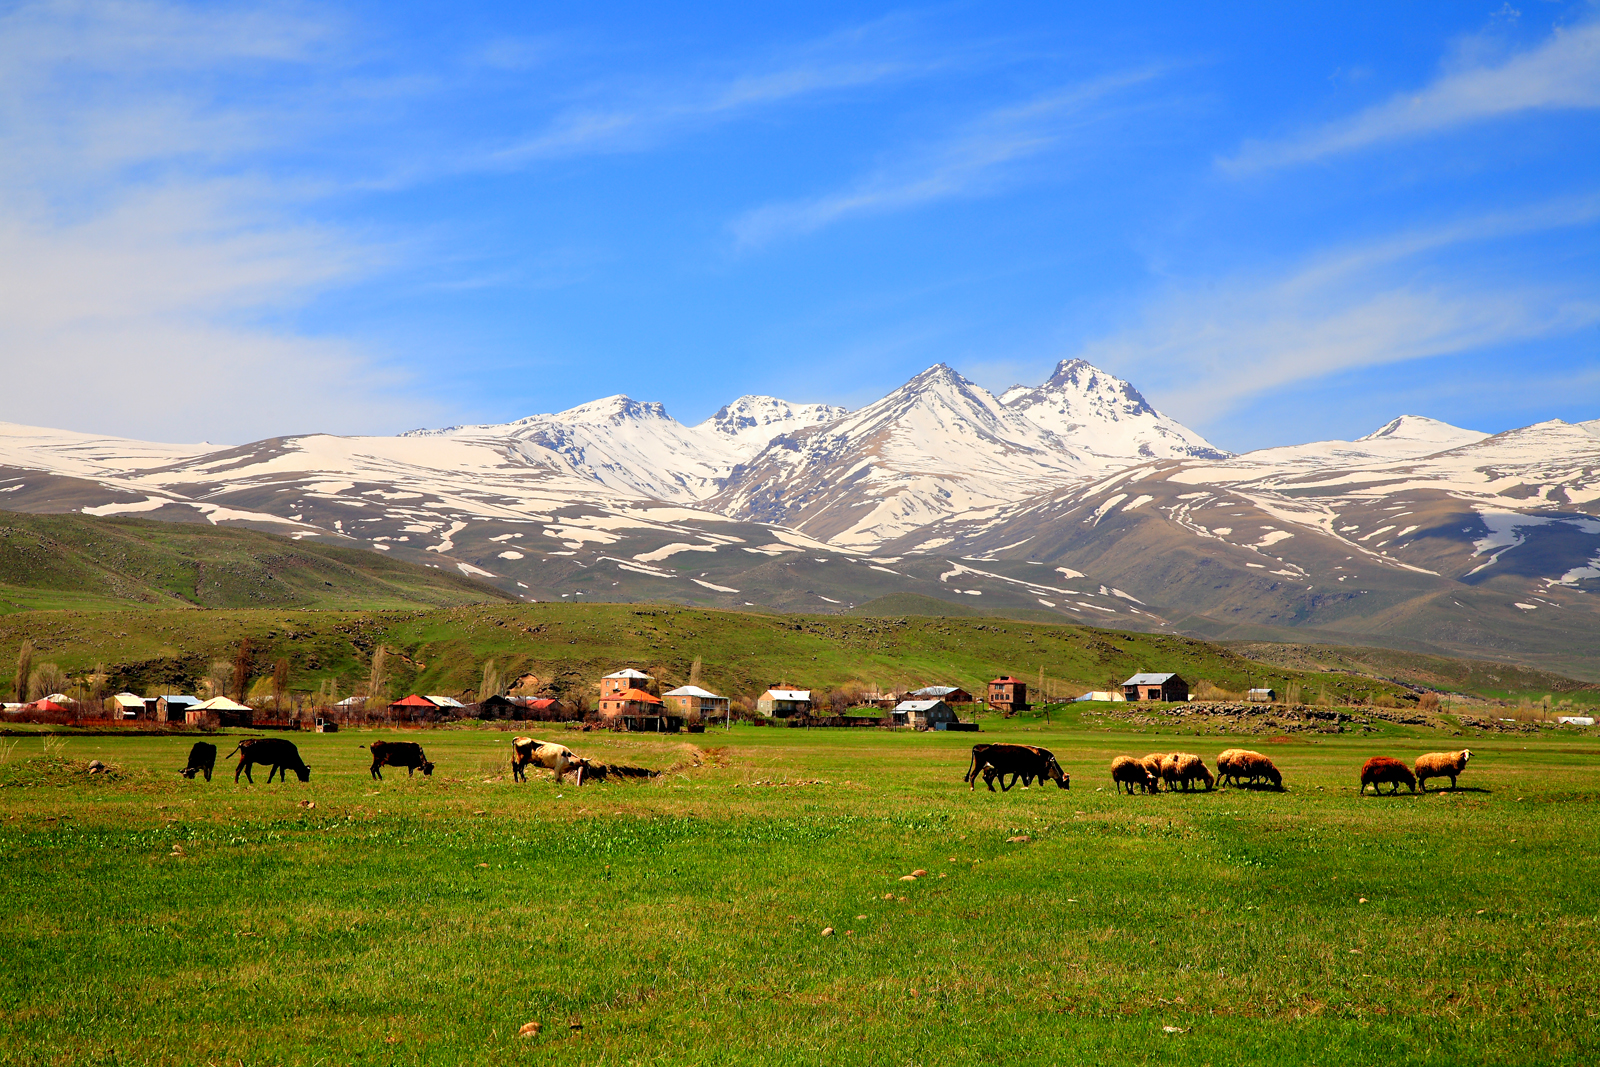 Pastures next to Aragats mountain, photo by Alexander Mkhitaryan B, Creative Commons Attribution-Share Alike 3.0 Unported license.